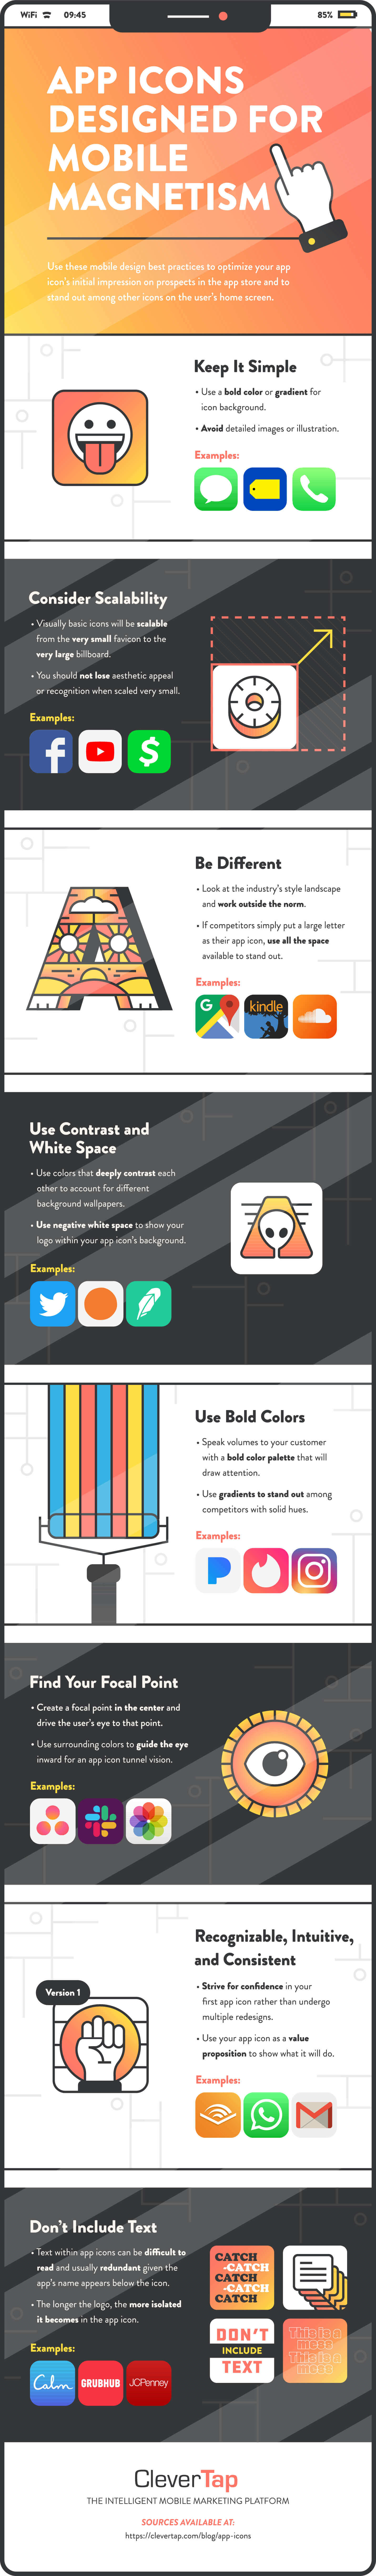 app icons best practices infographic